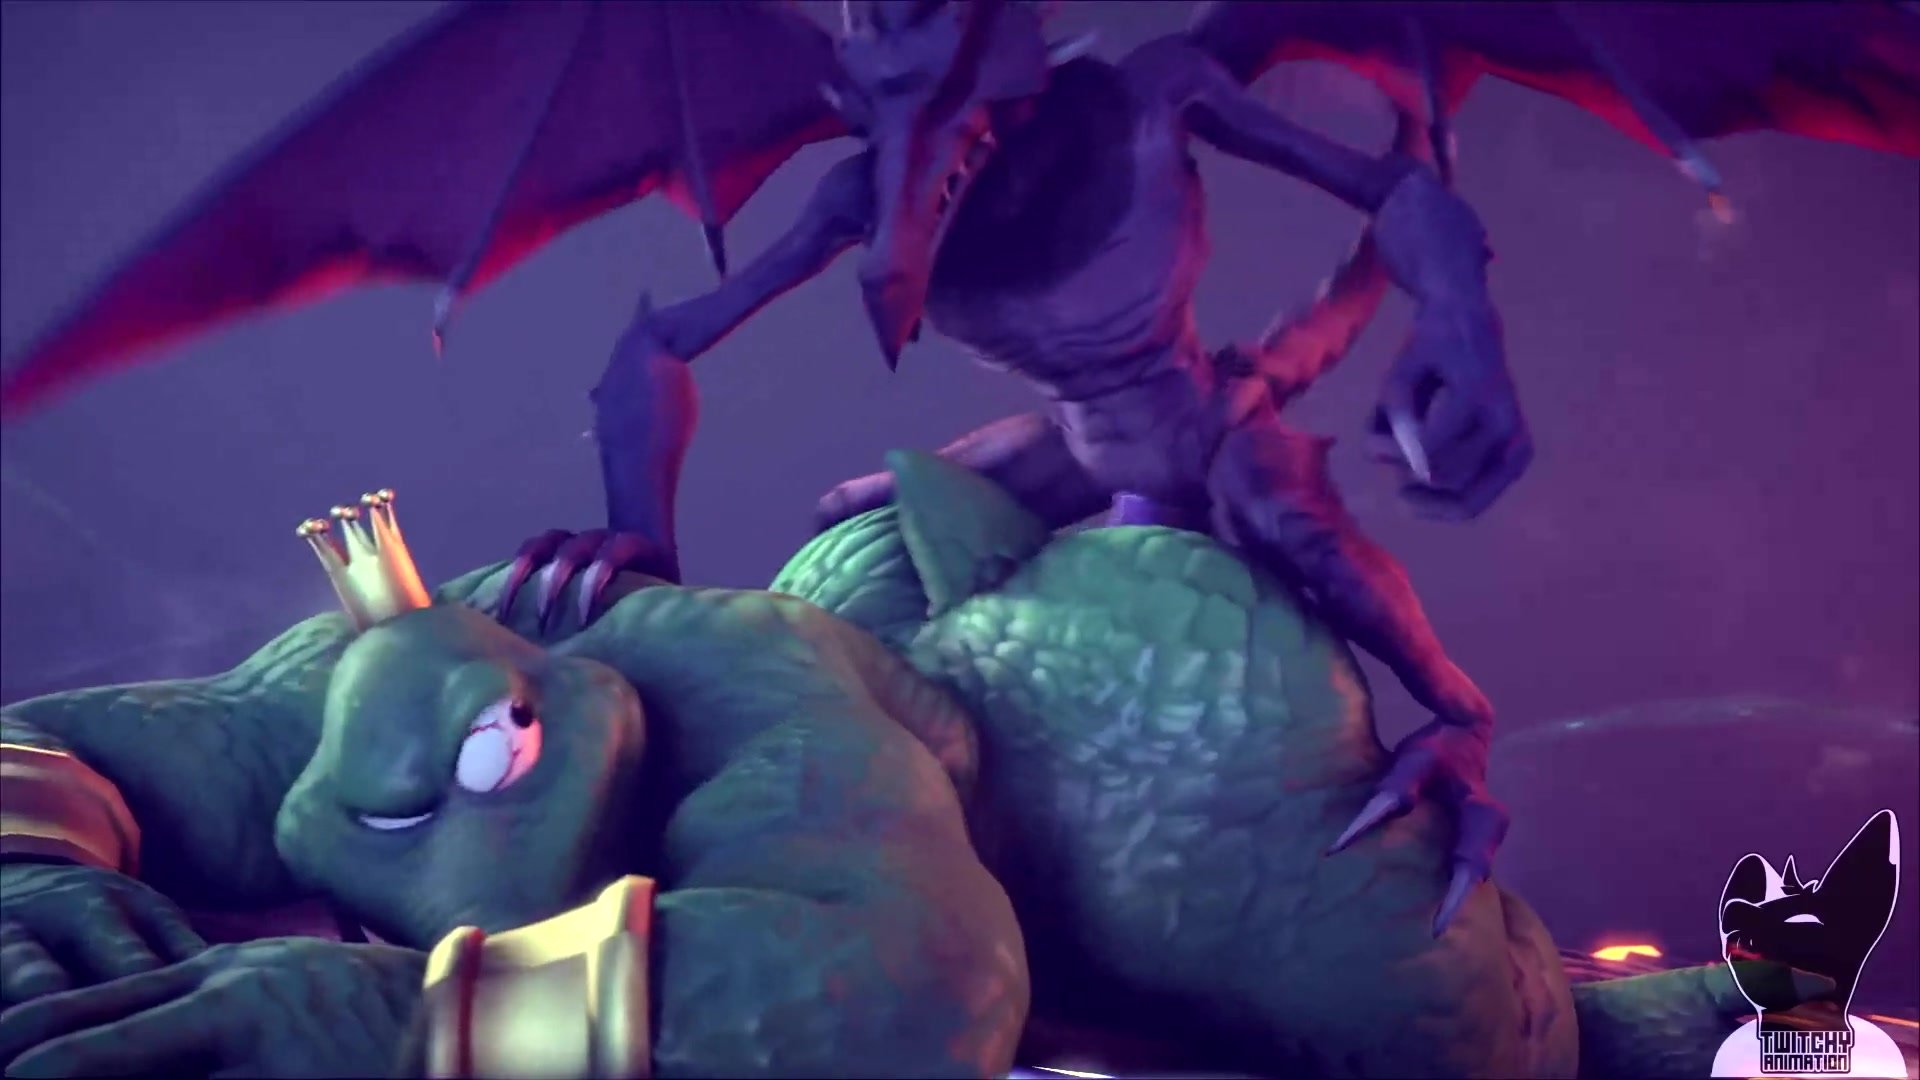 King K Rool getting railed by Ridley